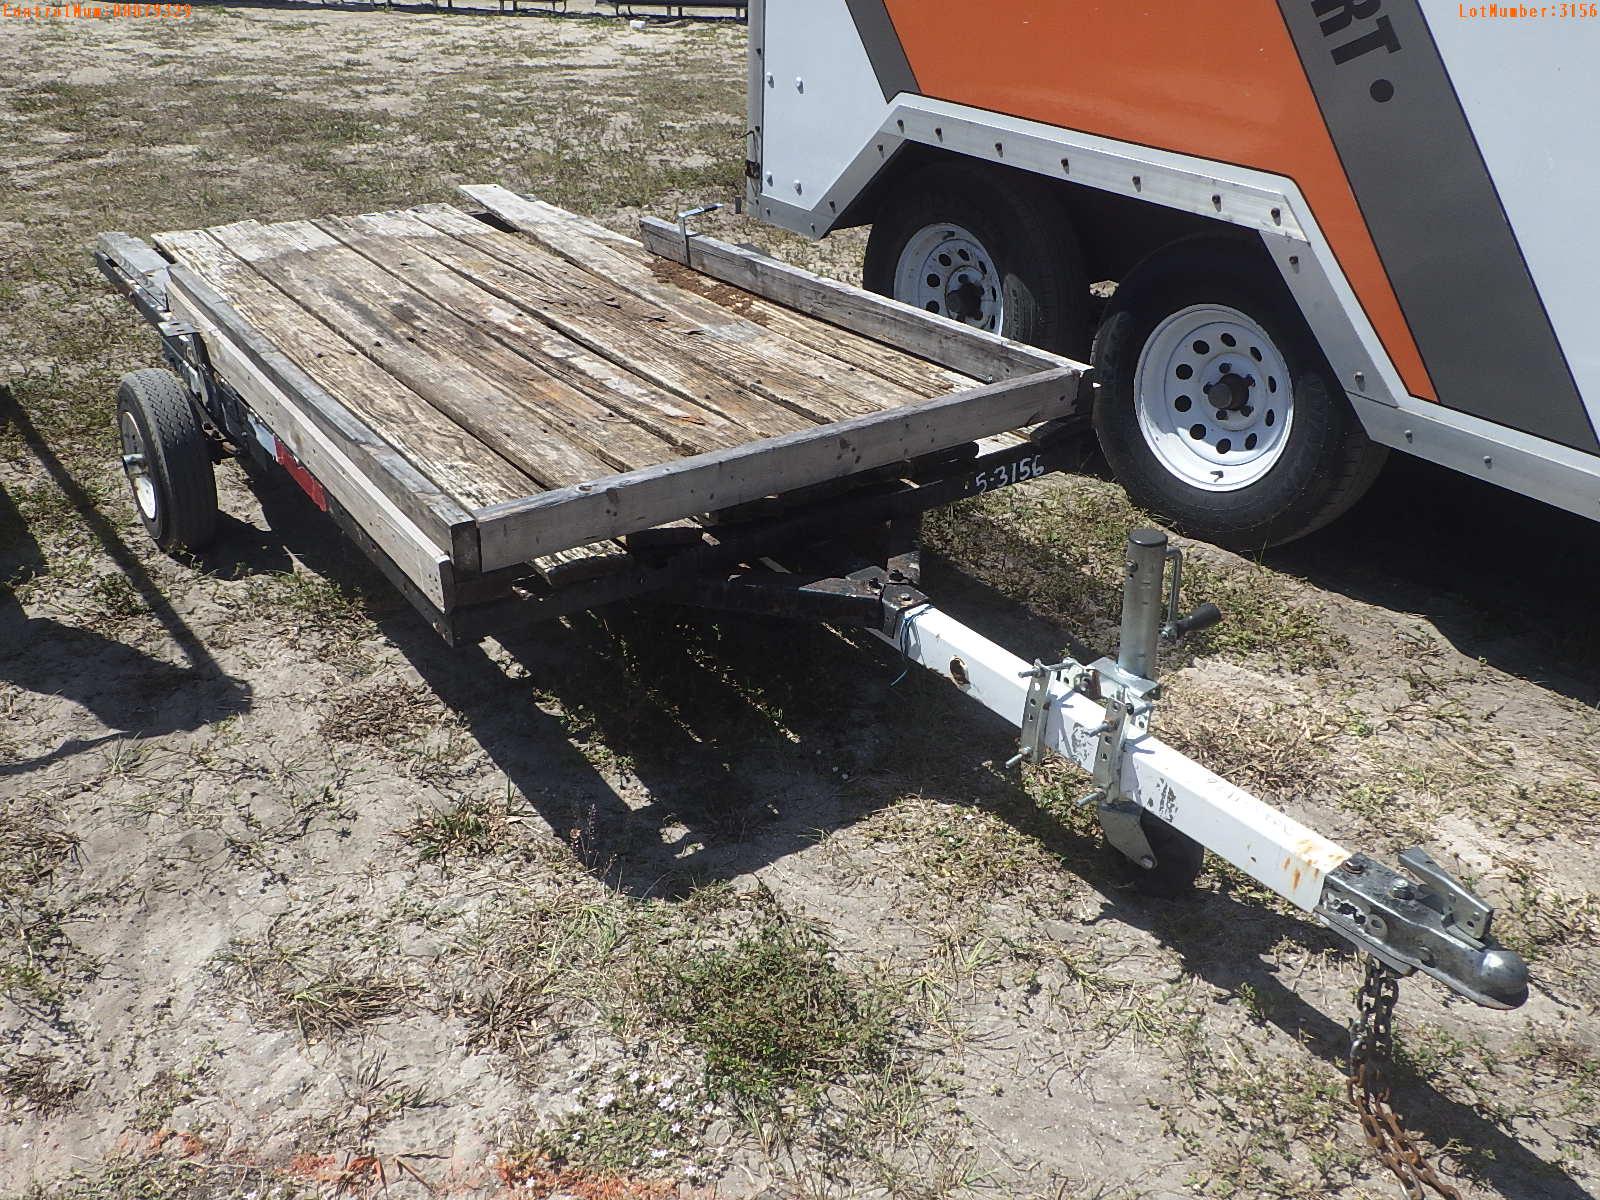 5-03156 (Trailers-Utility flatbed)  Seller: Gov-Port Richey Police Department SI